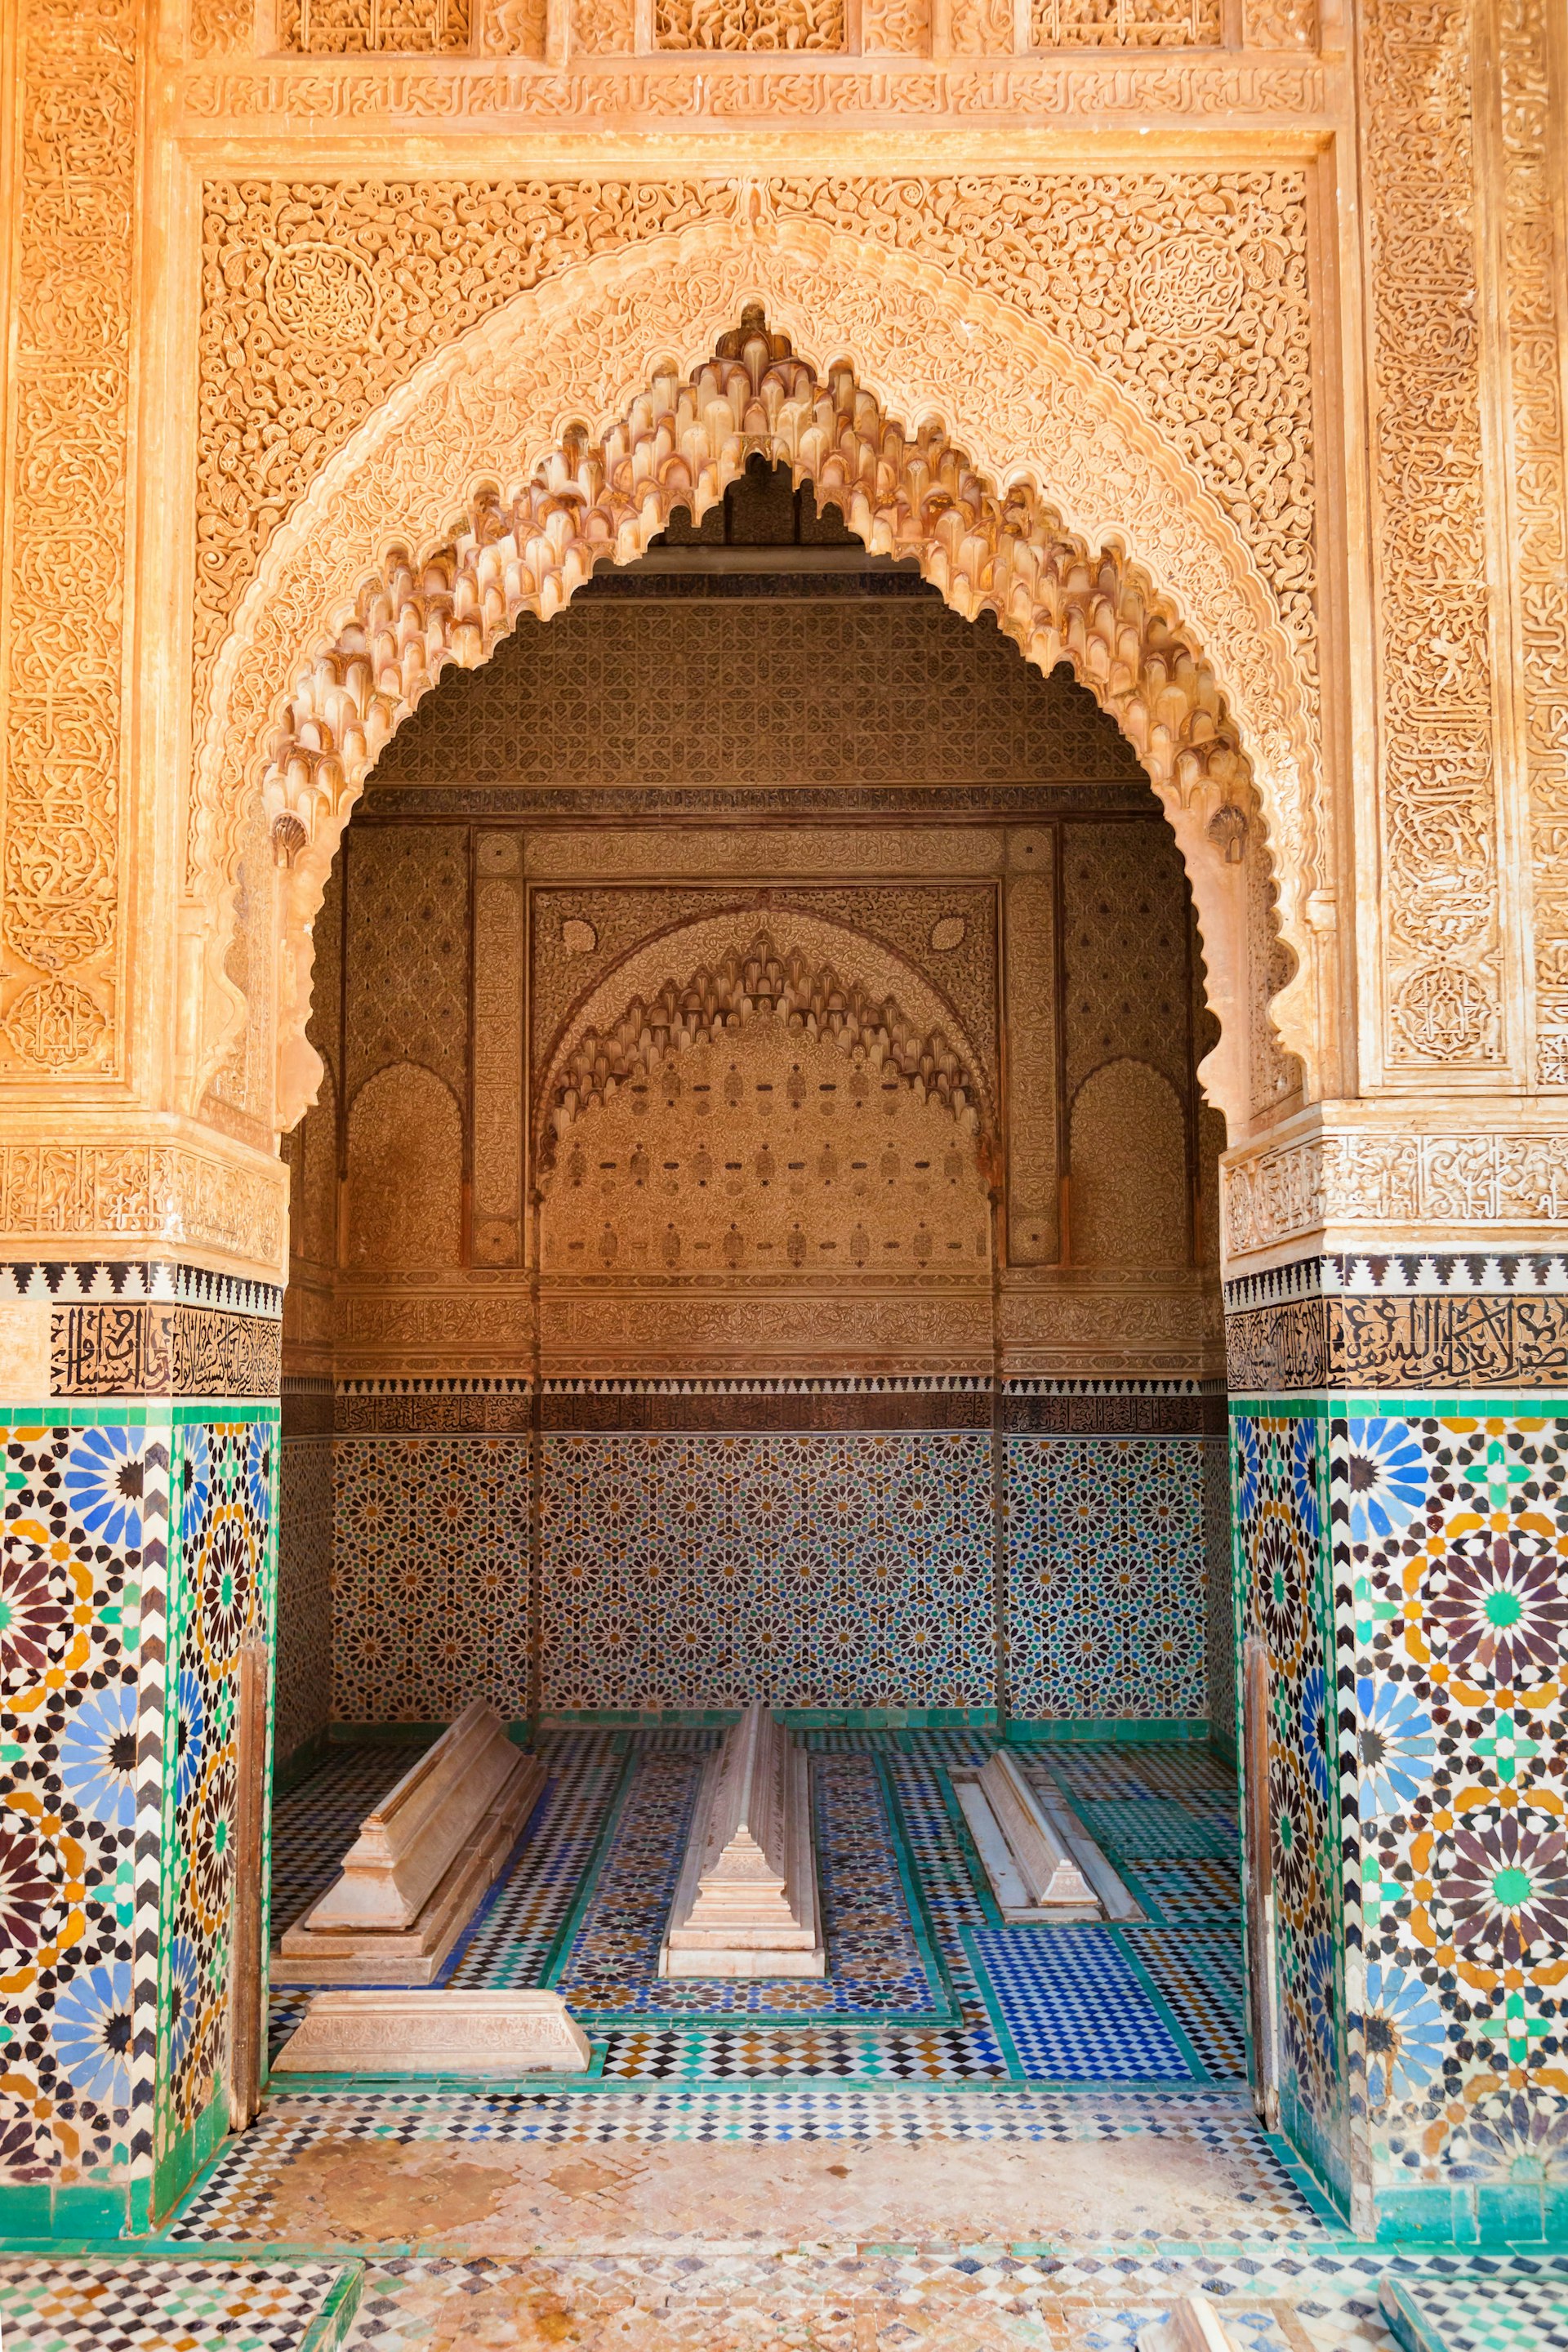 Tiled interior of the Saadian Tombs in Marrakesh, Morocco